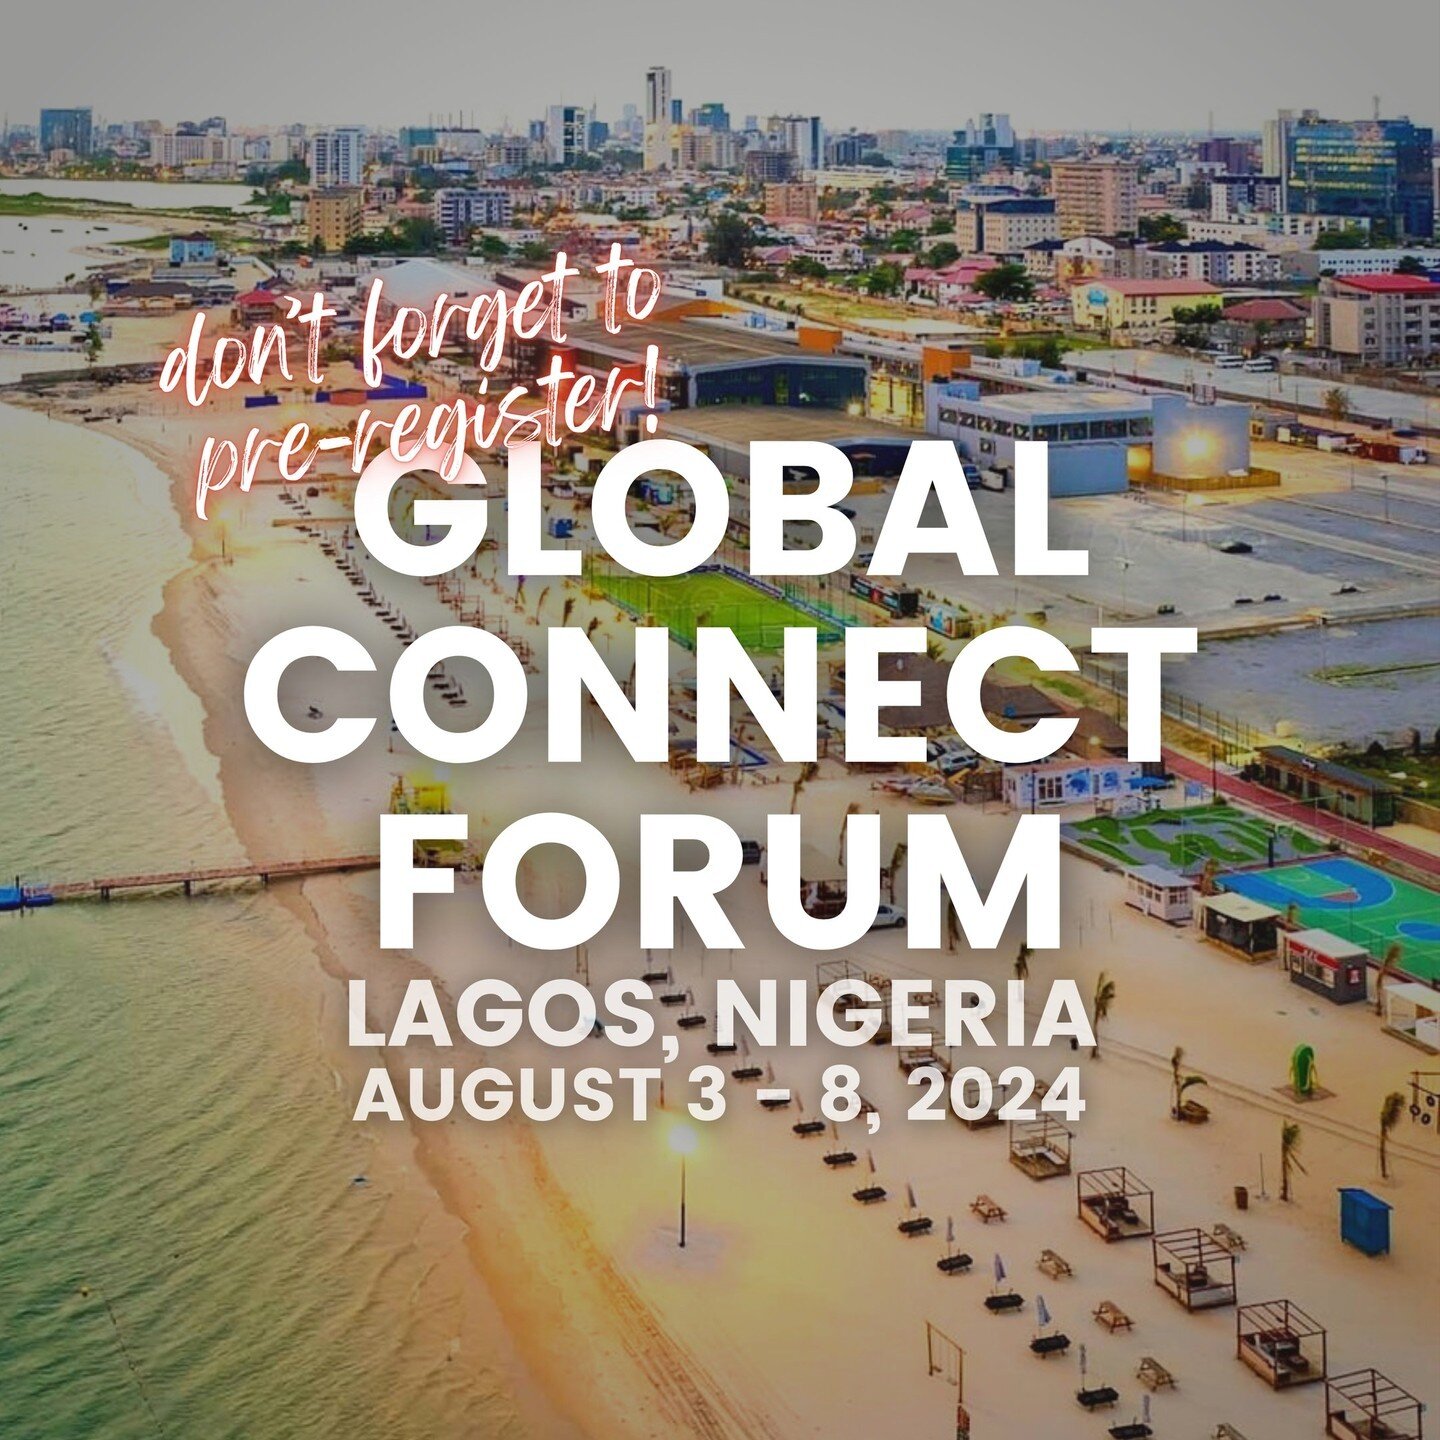 Have you pre-registered for our Global Connect Forum? Contact your school director if you're interested in coming with us this summer!⁠
⁠
#beammissionsfoundation #bmf #icoc #lagos